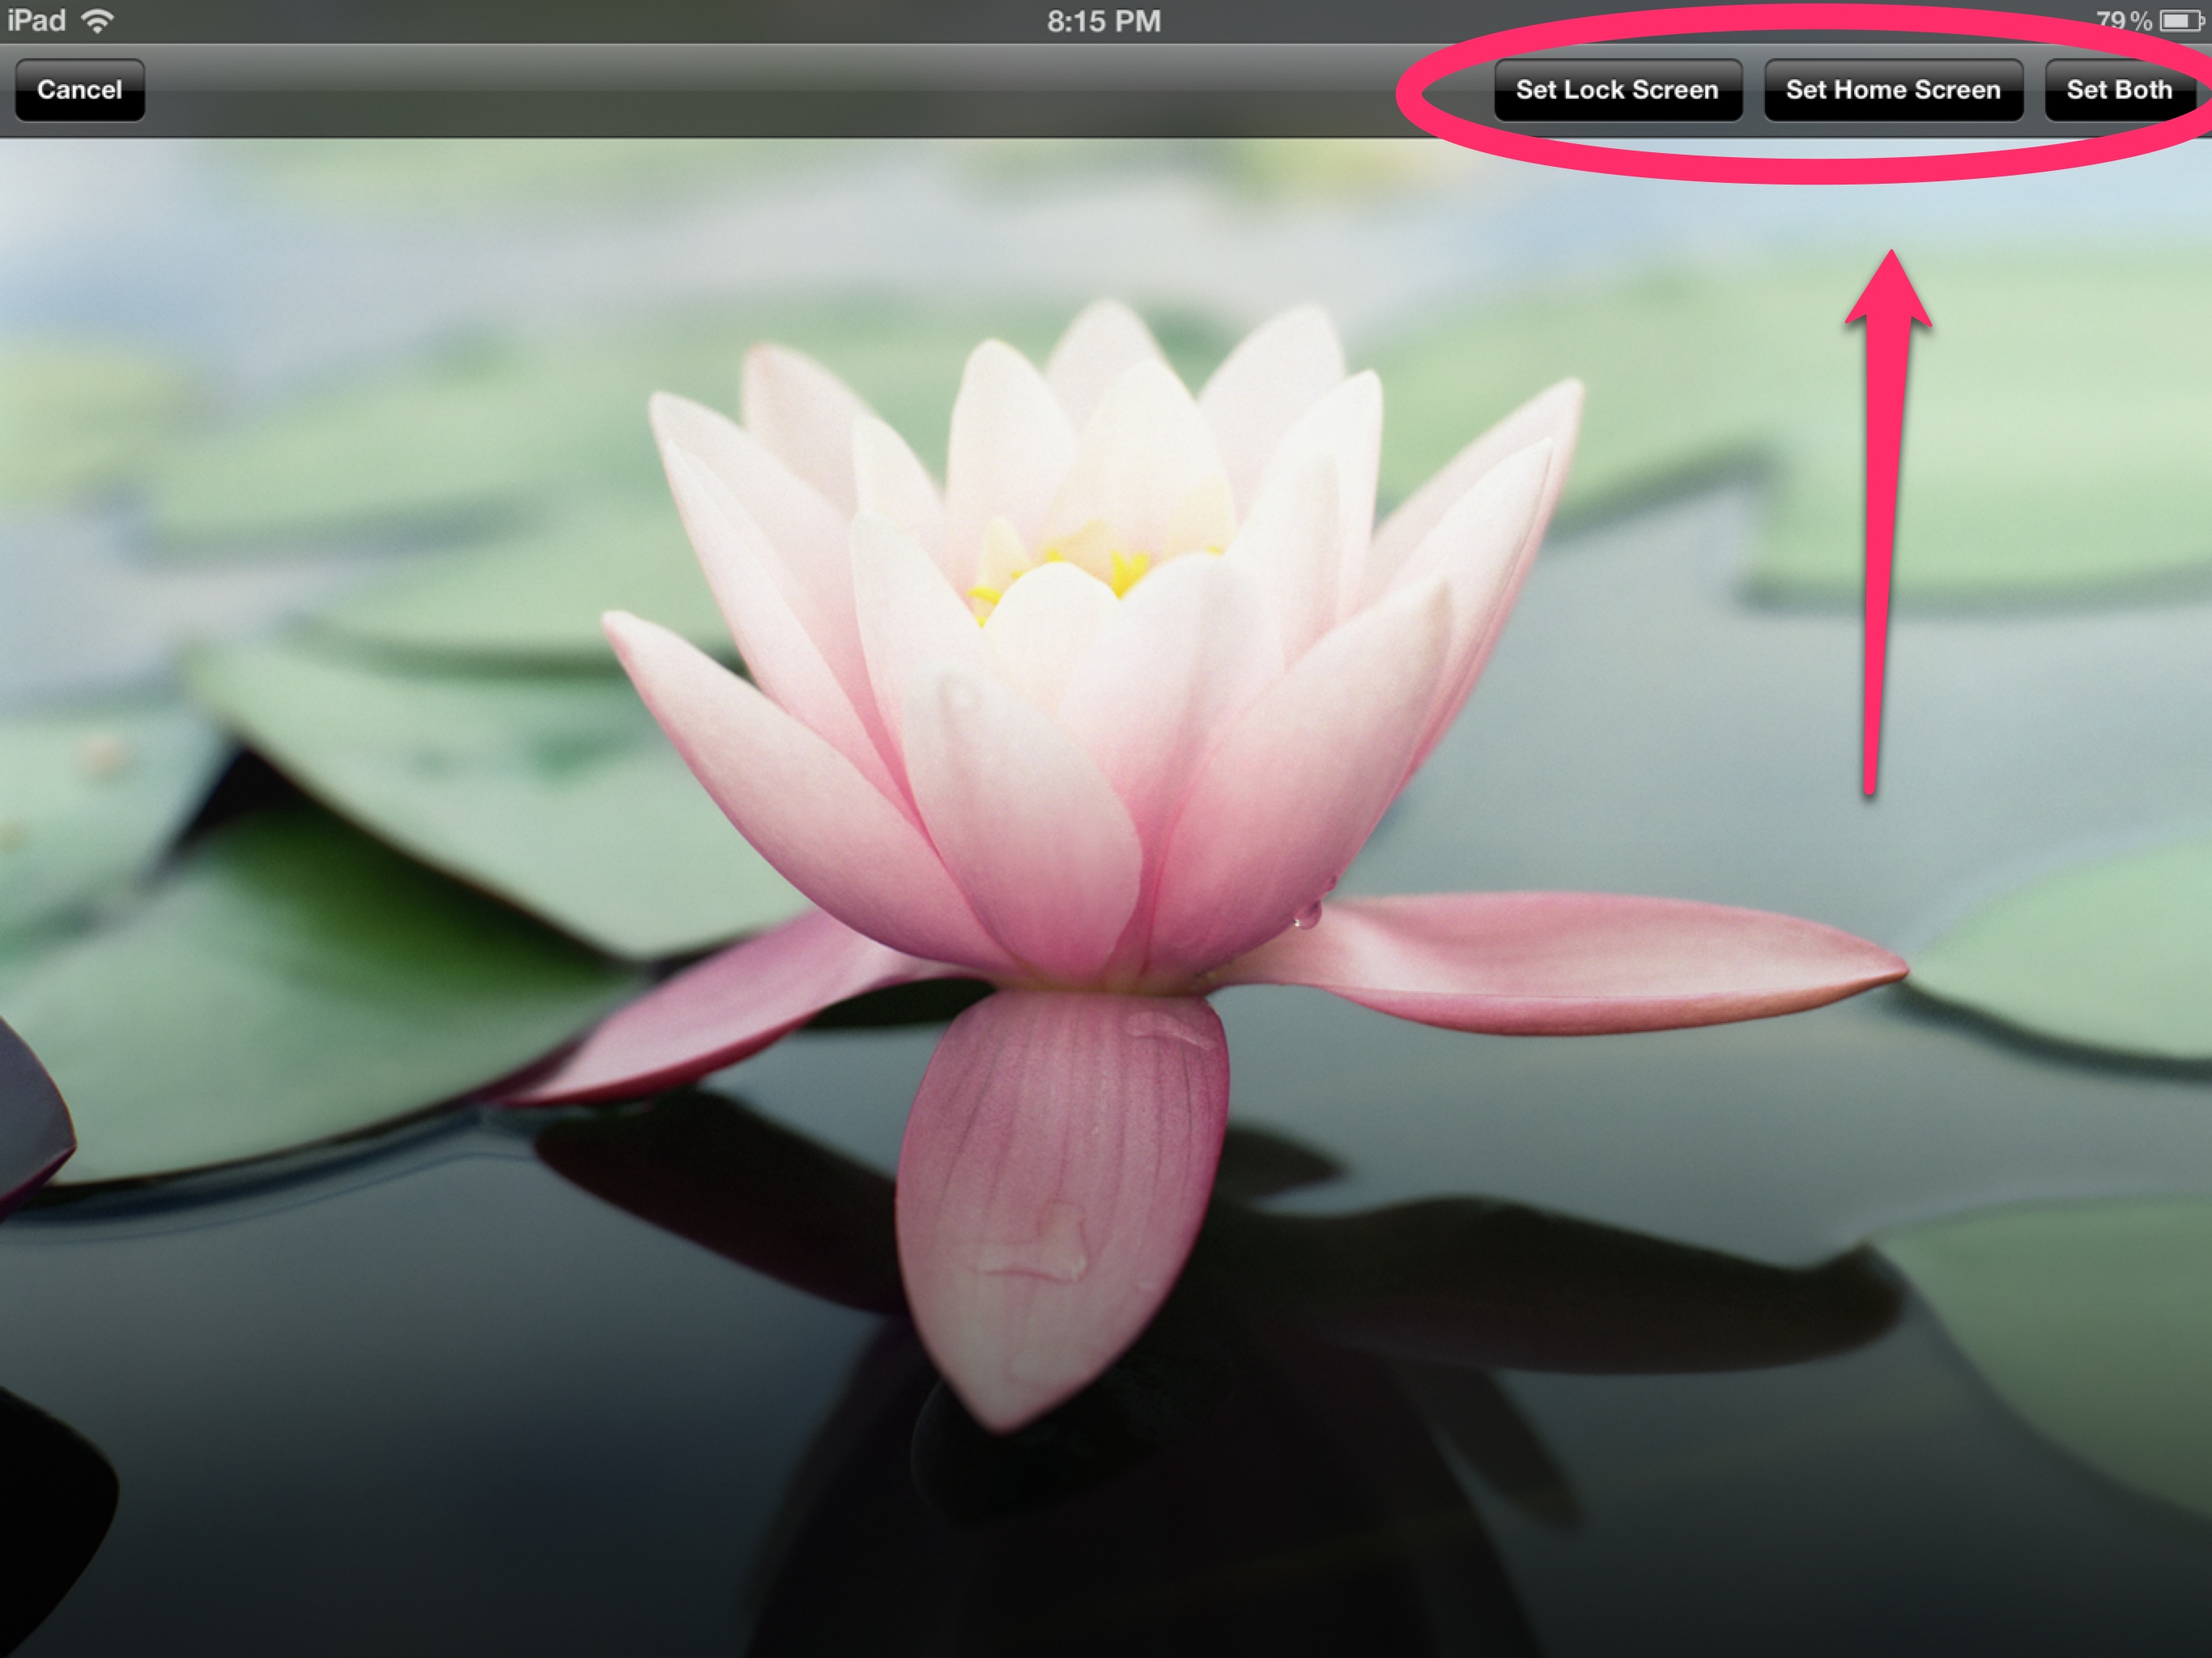 How To Change Your Wallpaper On iPhone Or iPad Part Of The